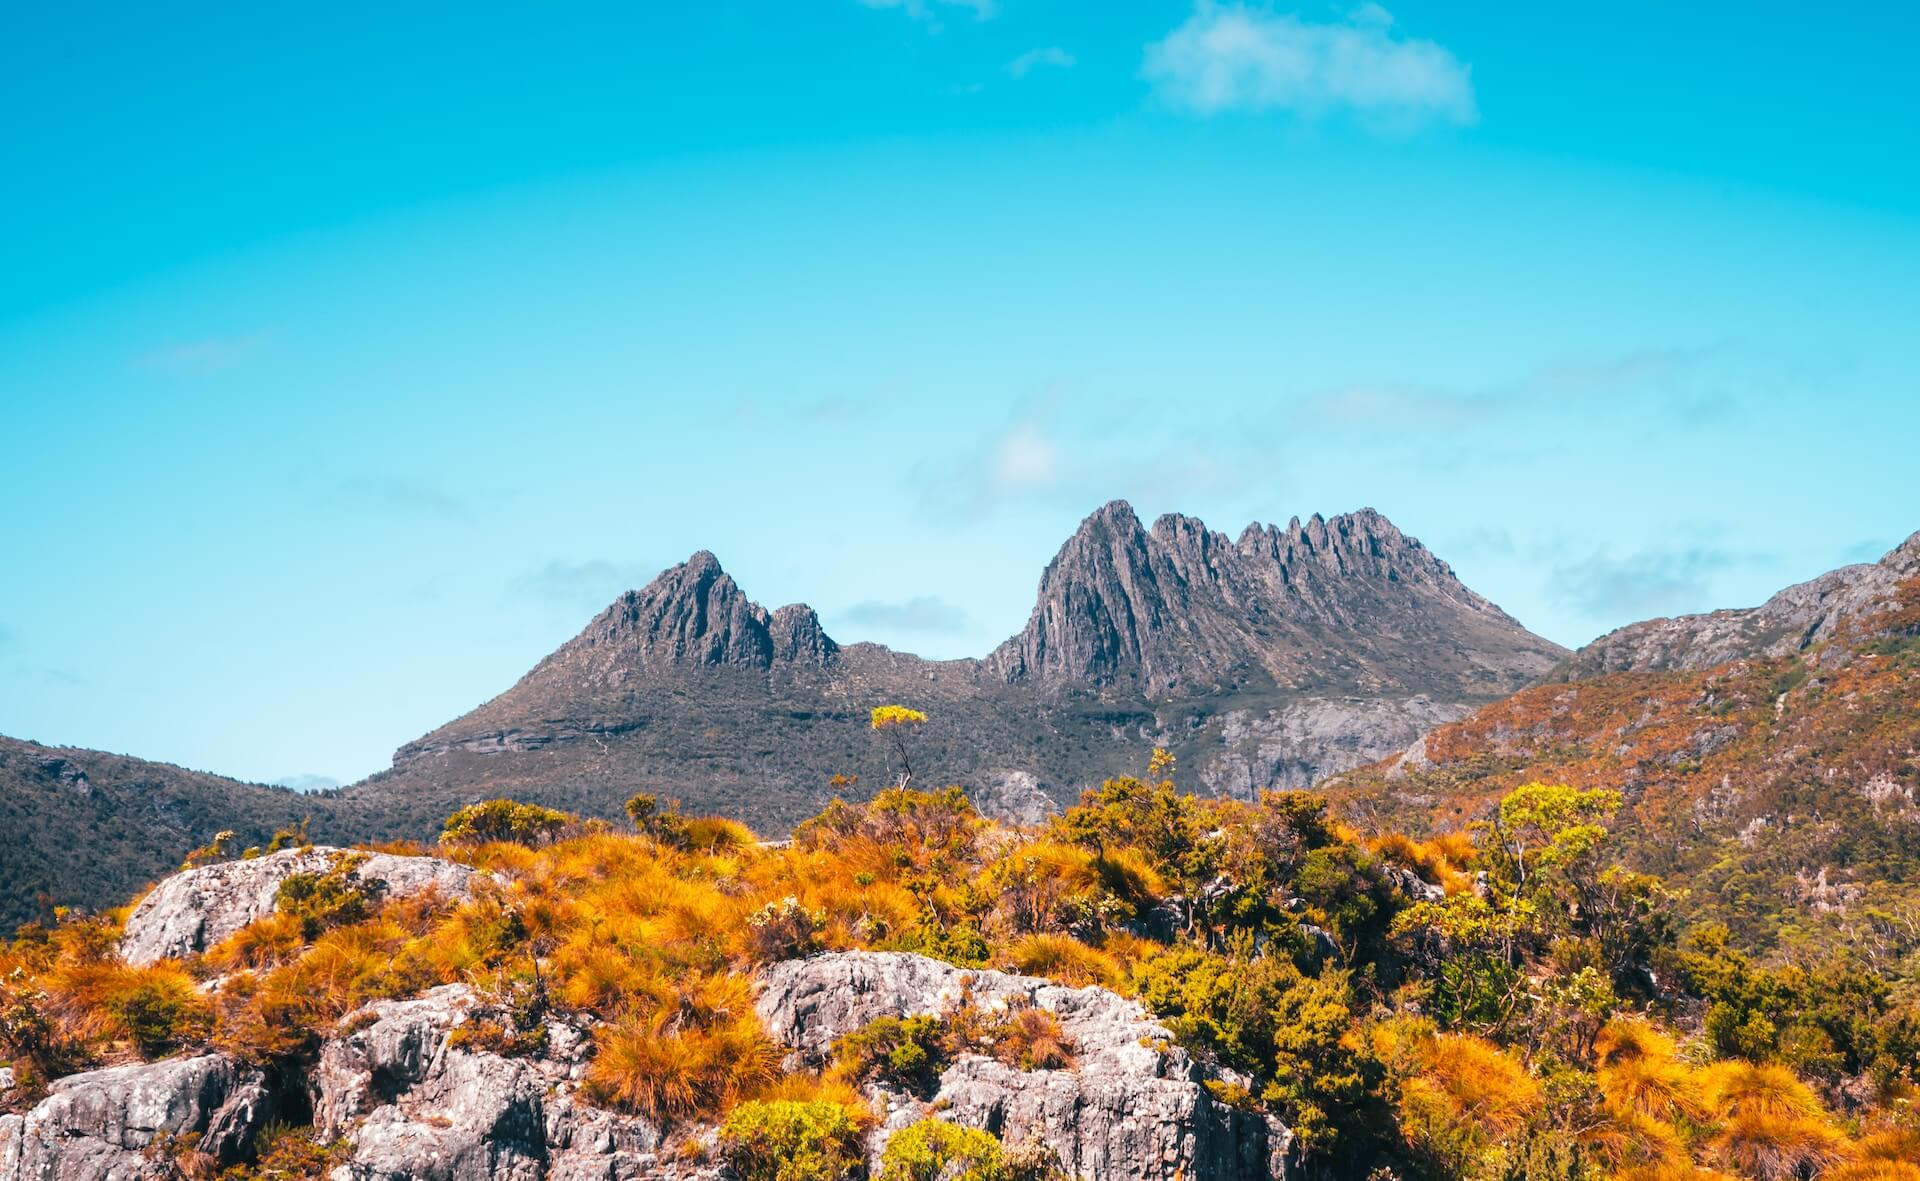 view of cradle mountain from the rocks and trees